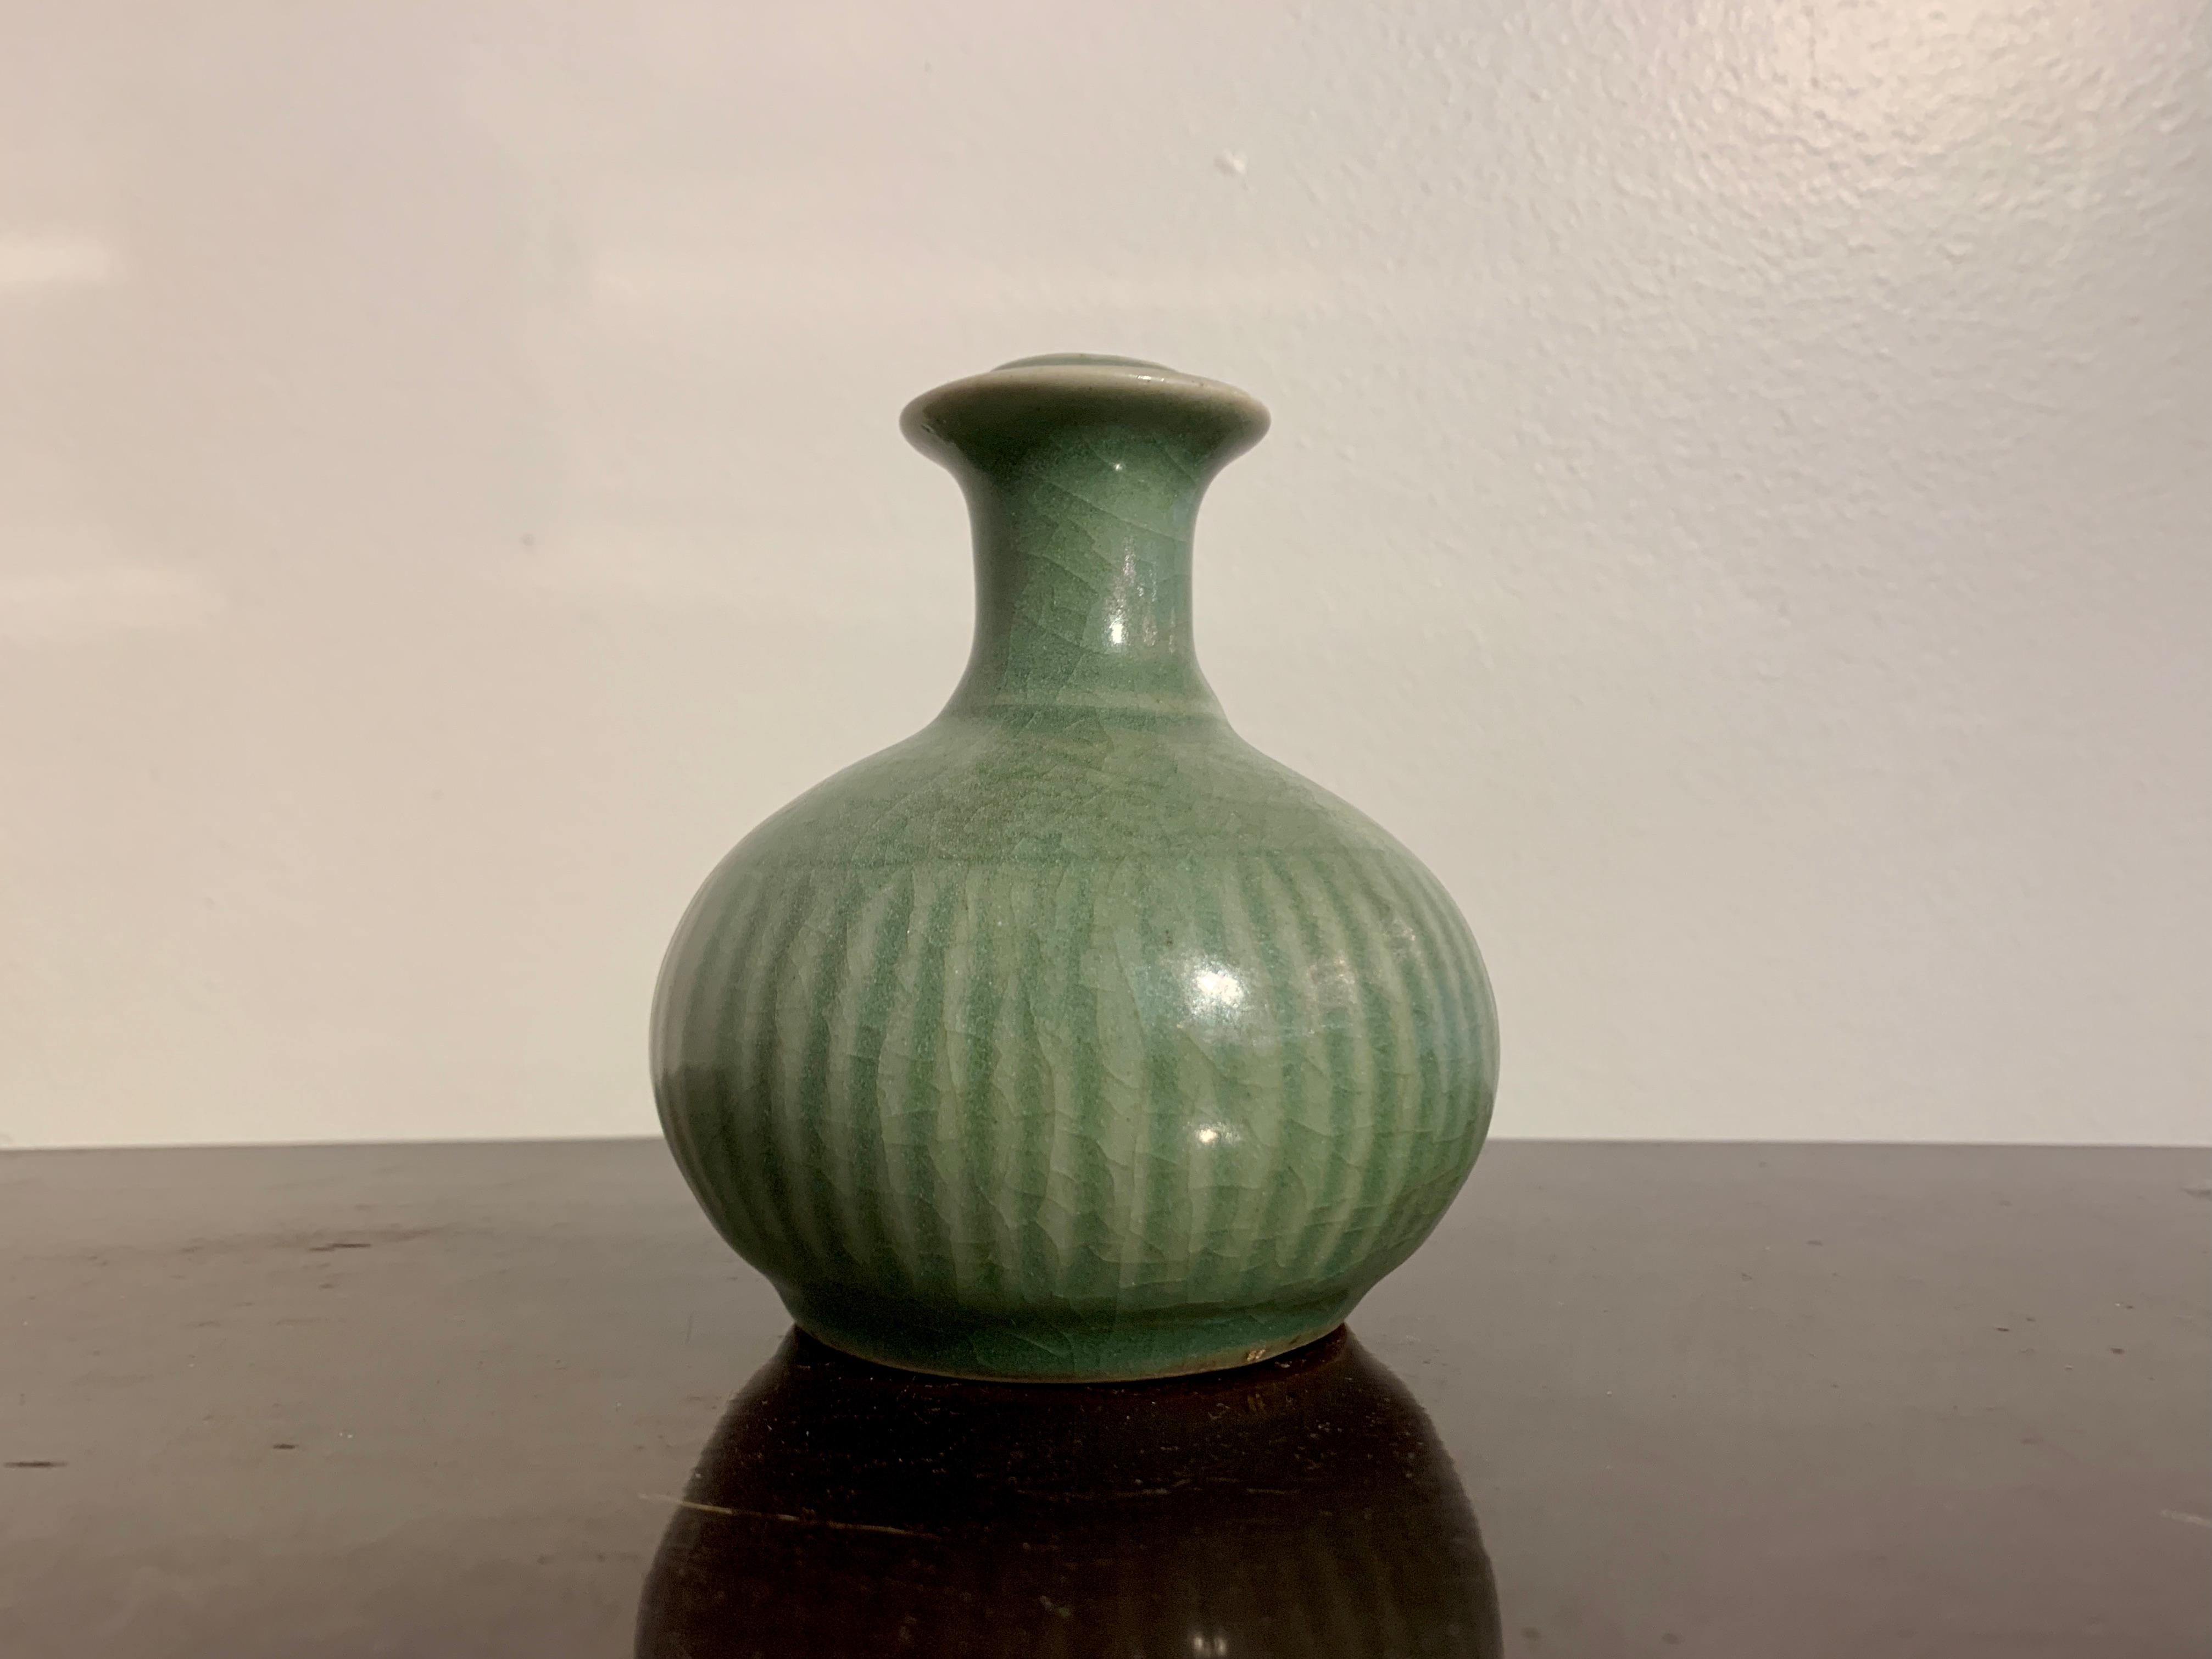 A darling small Chinese celadon glazed kendi, or pouring vessel, mid Qing Dynasty, 18th century, China, for the Southeast Asian market.

The diminutive kendi of typical form, with a globular body, short neck, flanged mouth and large, voluptuous